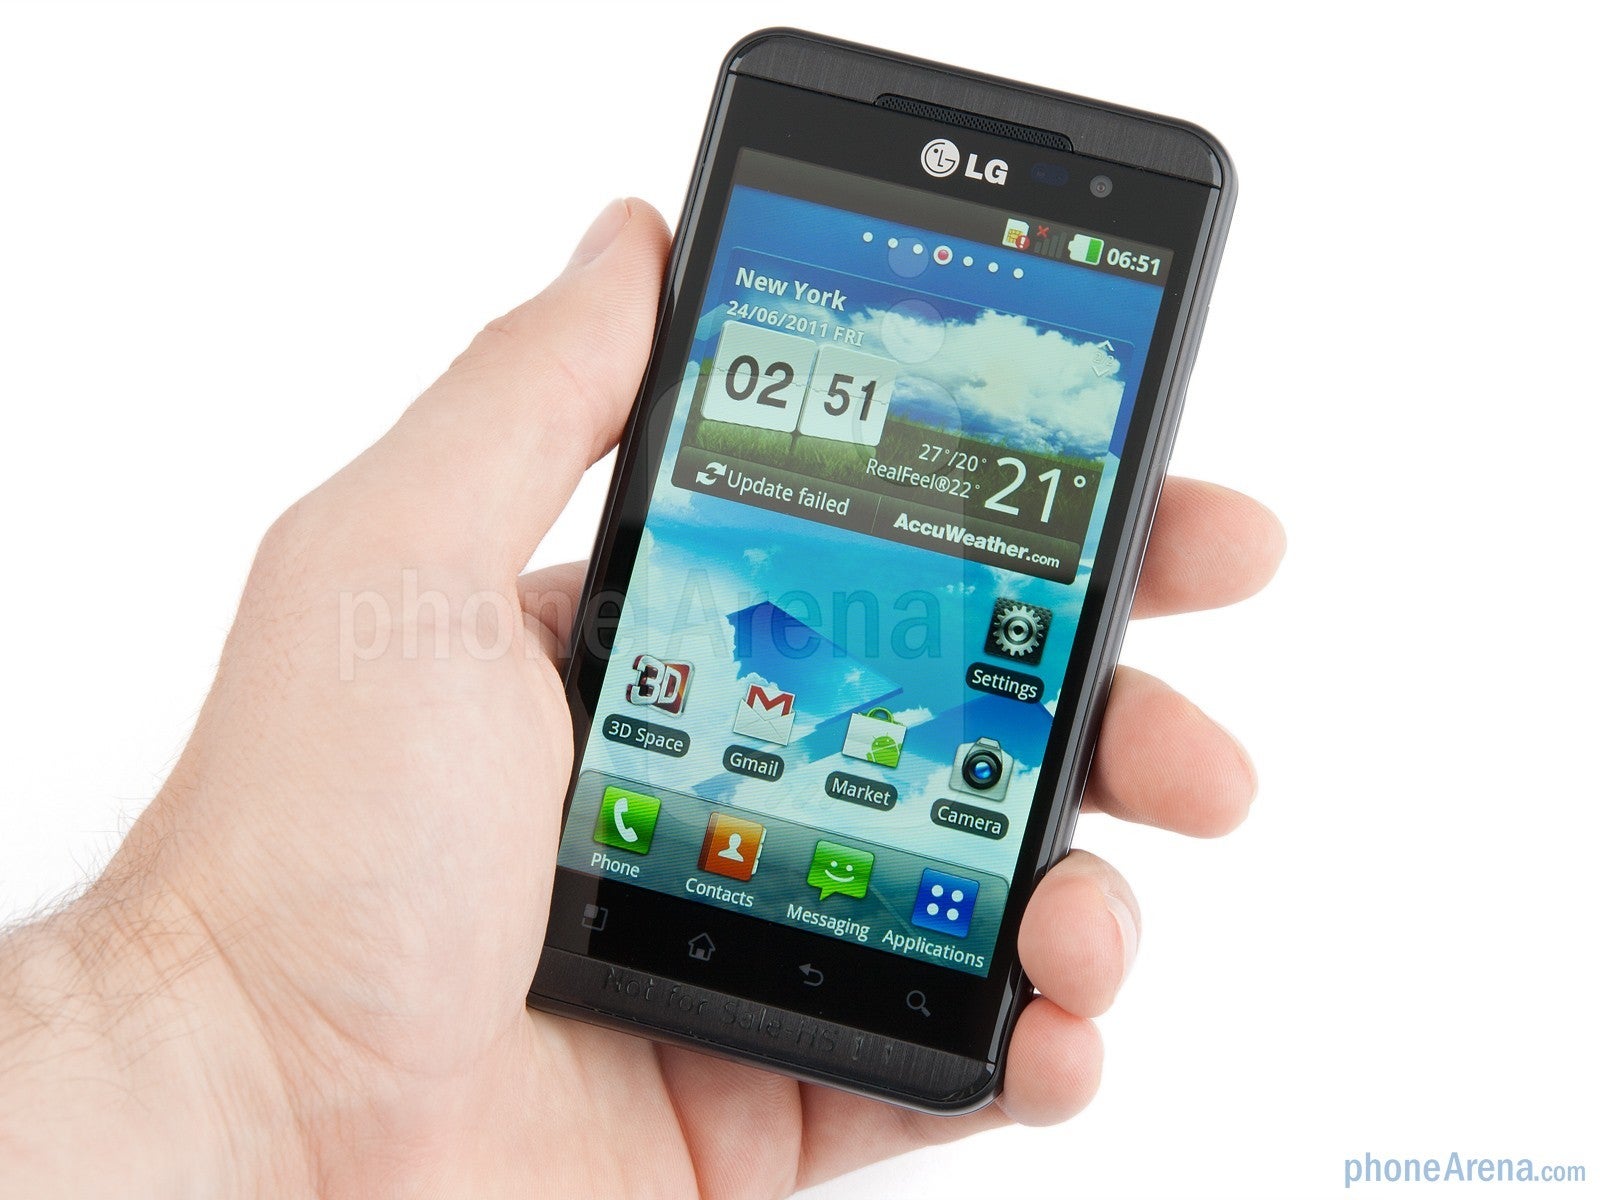 The LG Optimus 3D (Thrill 4G) was one of the phones that tried to sell us on the idea of 3D displays. - Cool concepts that started out intriguing but never took off